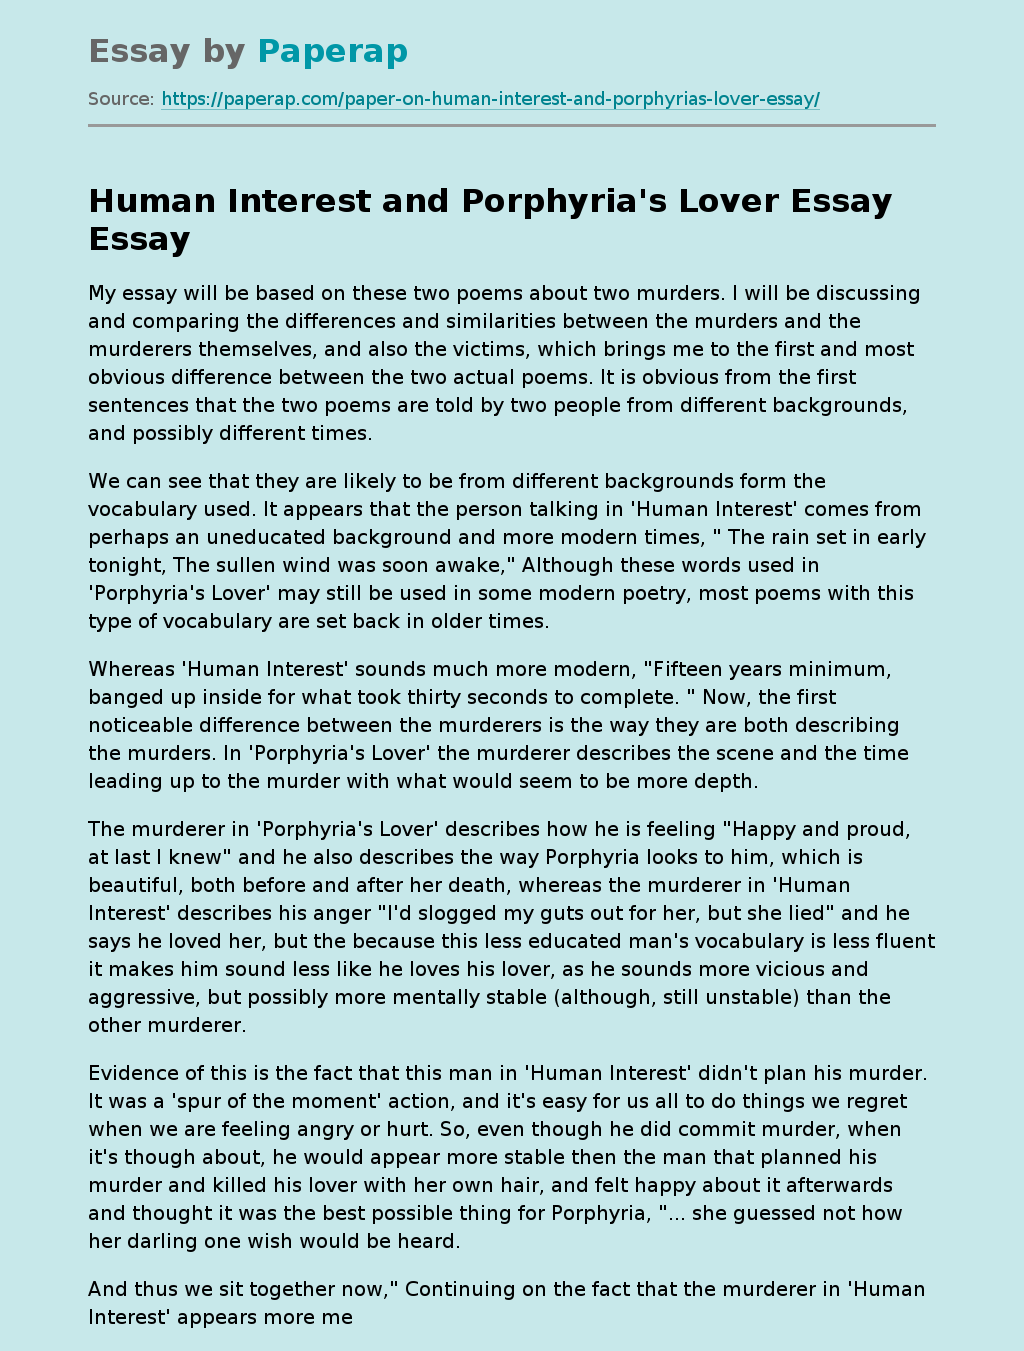 Poems "Human Interest" and "Porphyria's Lover"